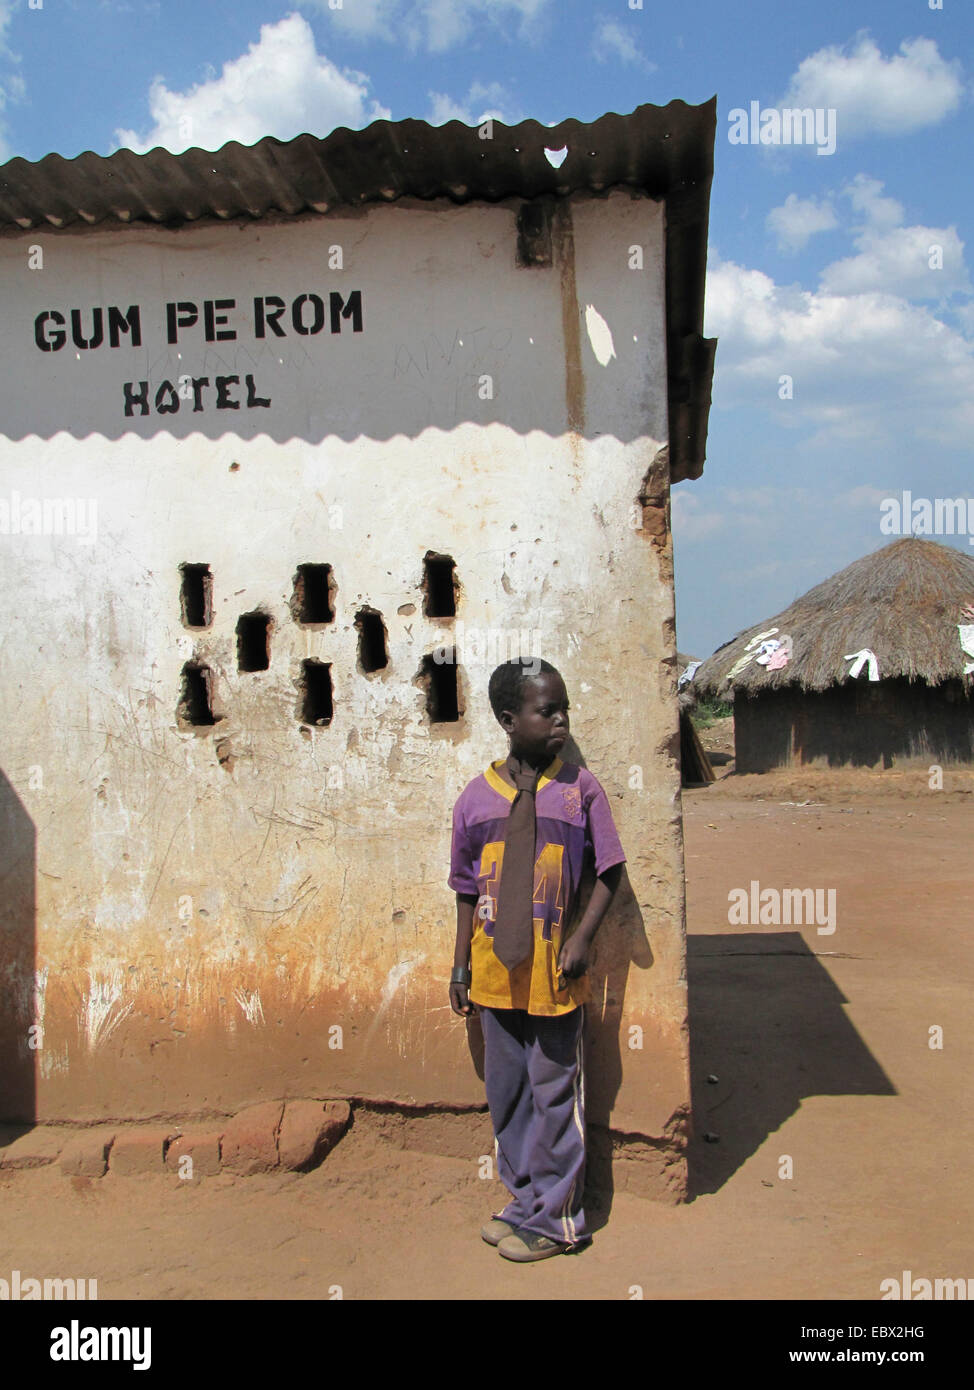 Refugee camp for internally displaced people in northern Uganda around Gulu, simple mud house in the background, boy standing next to a simple hotel, Uganda, Gulu Stock Photo